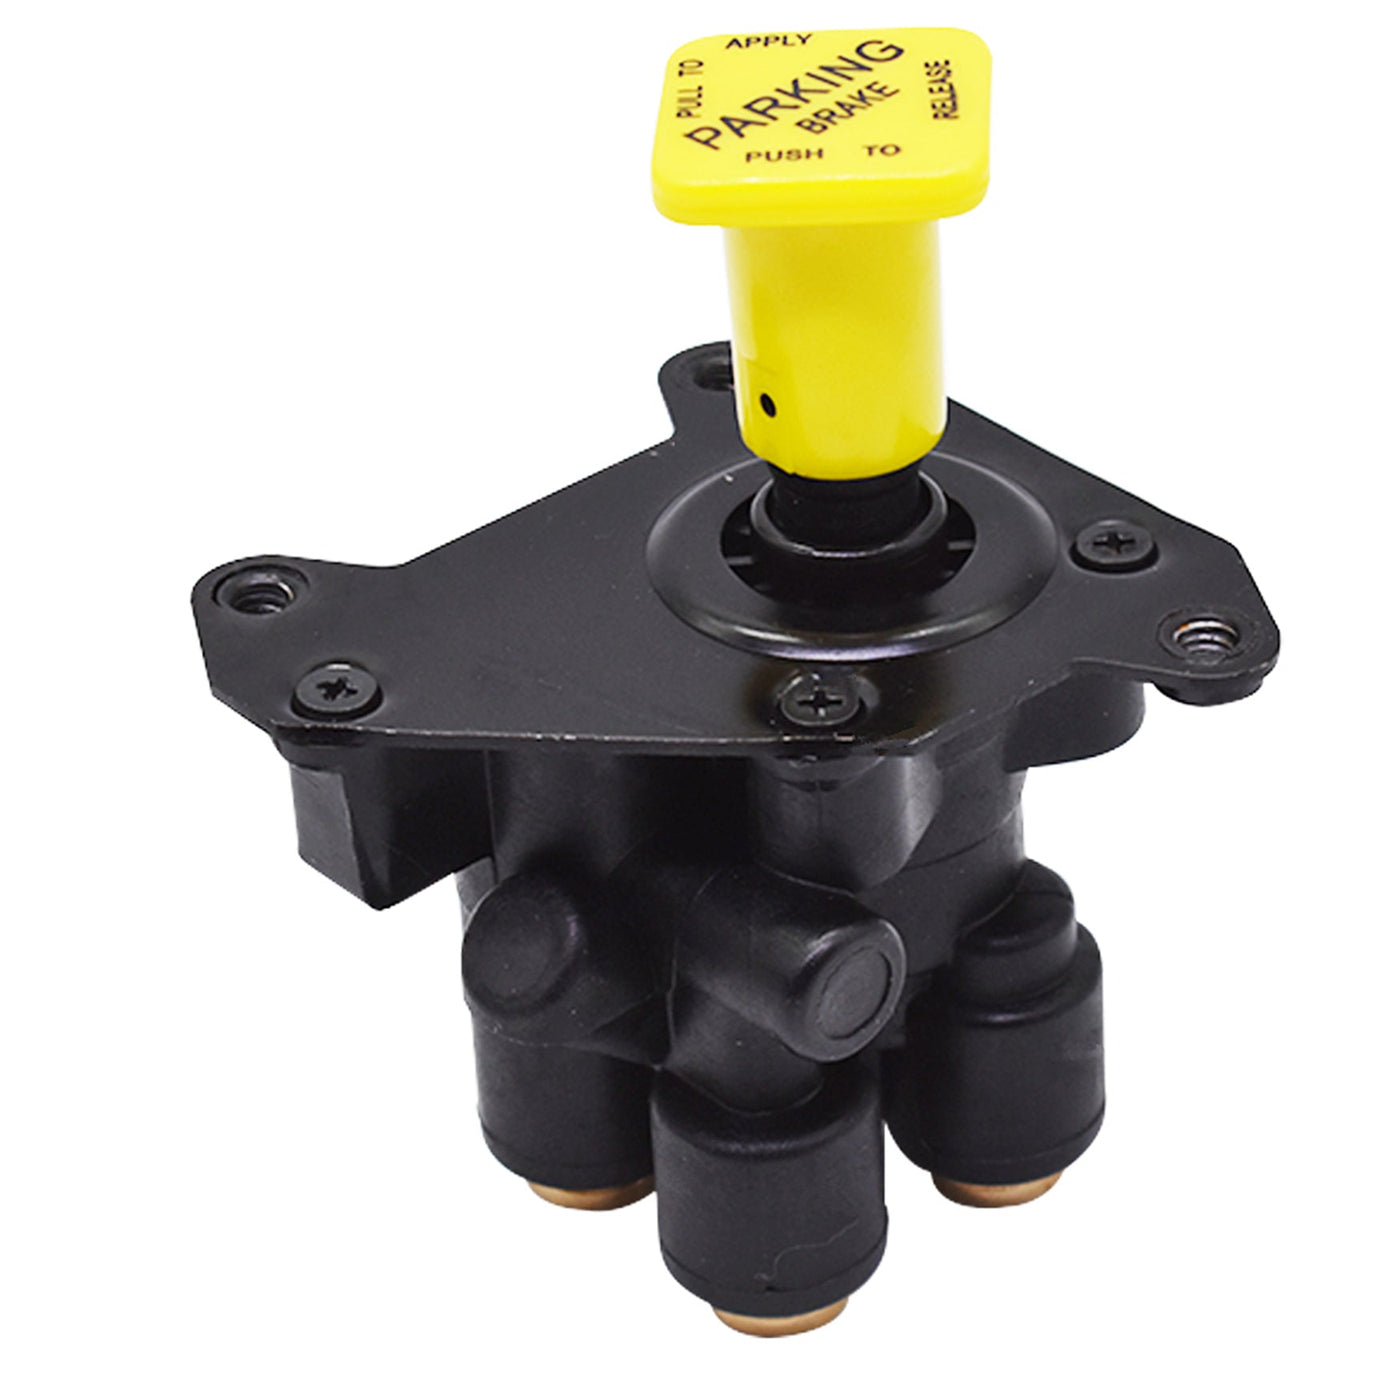 PP-DC Hand Operated Dash Truck/Bus Control Valve 065661, 800733